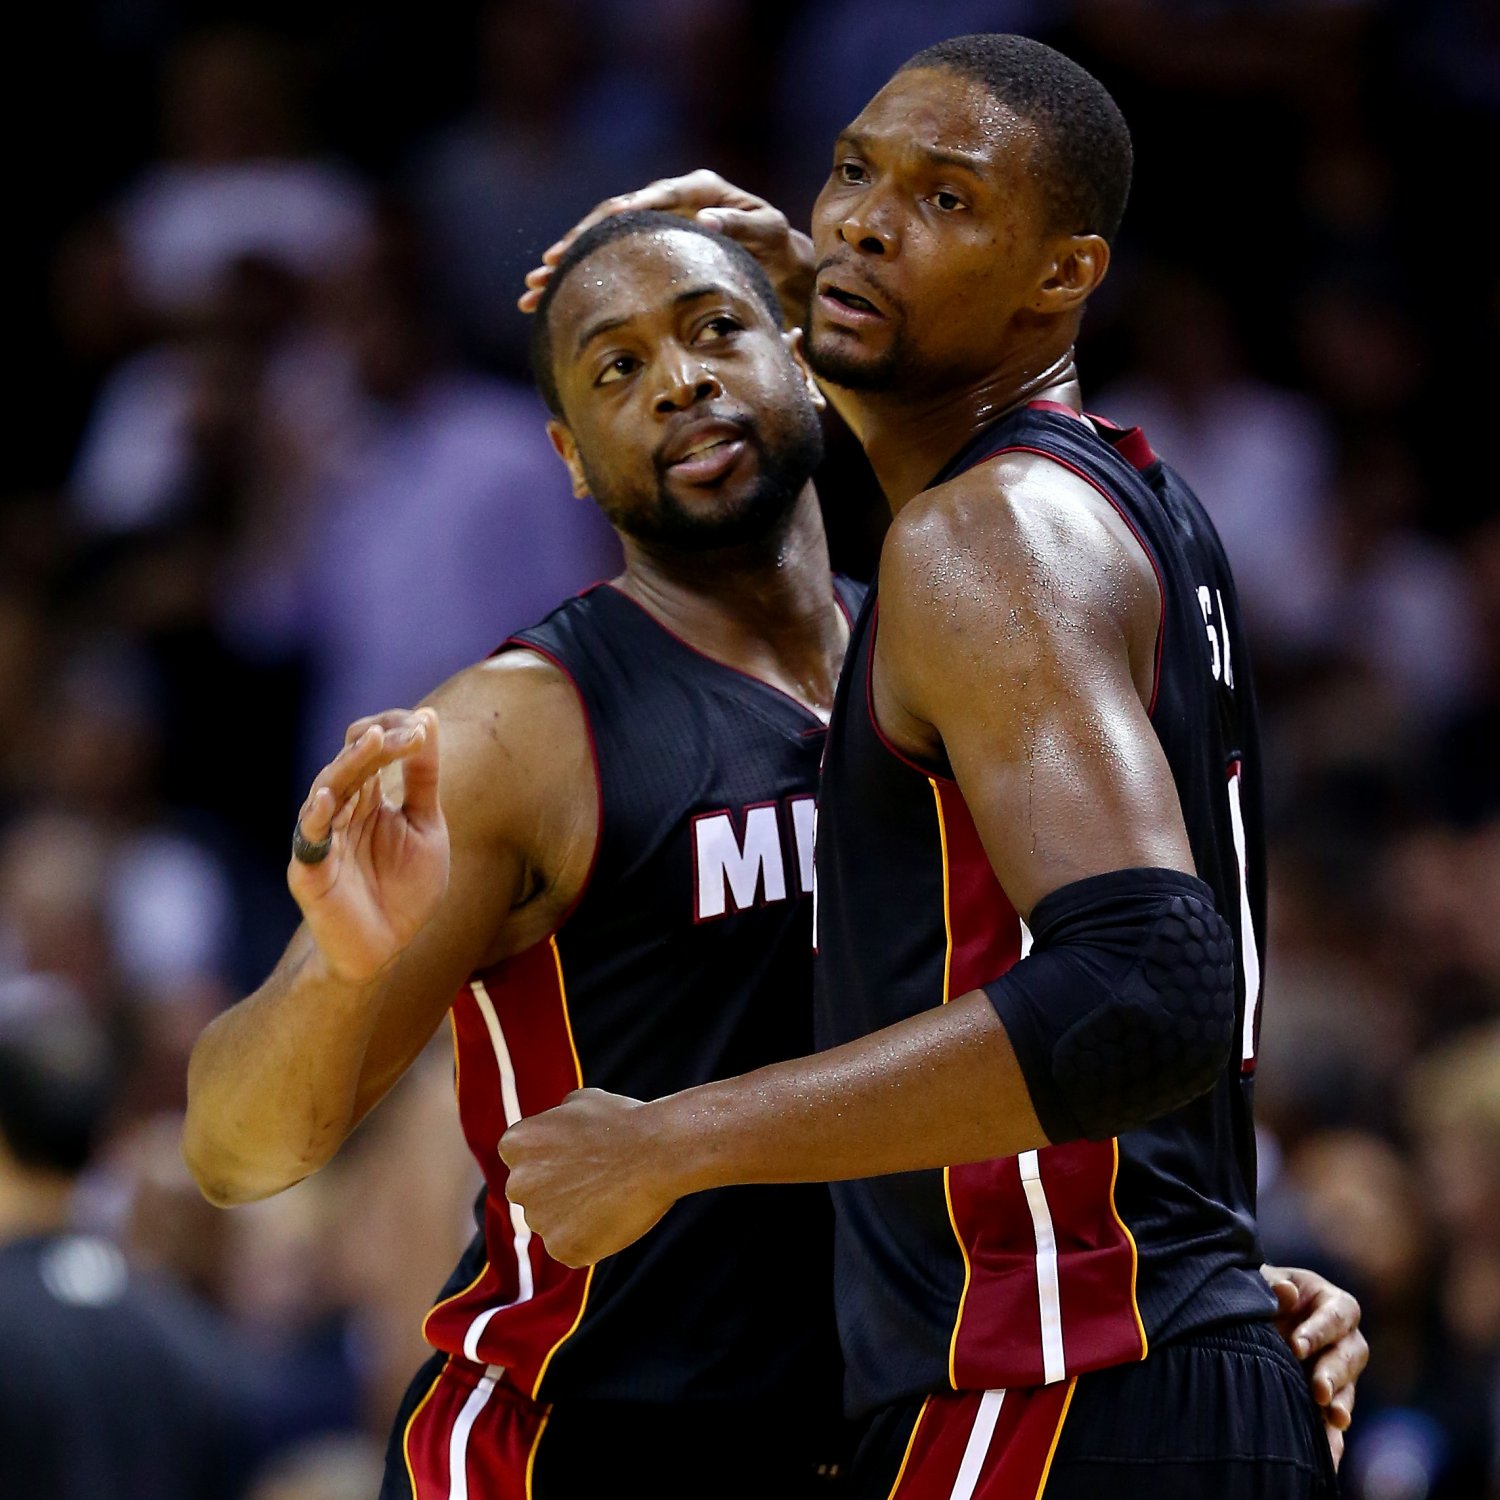 Are Dwyane Wade and Chris Bosh Enough for the Miami Heat to Rebuild? | Bleacher Report